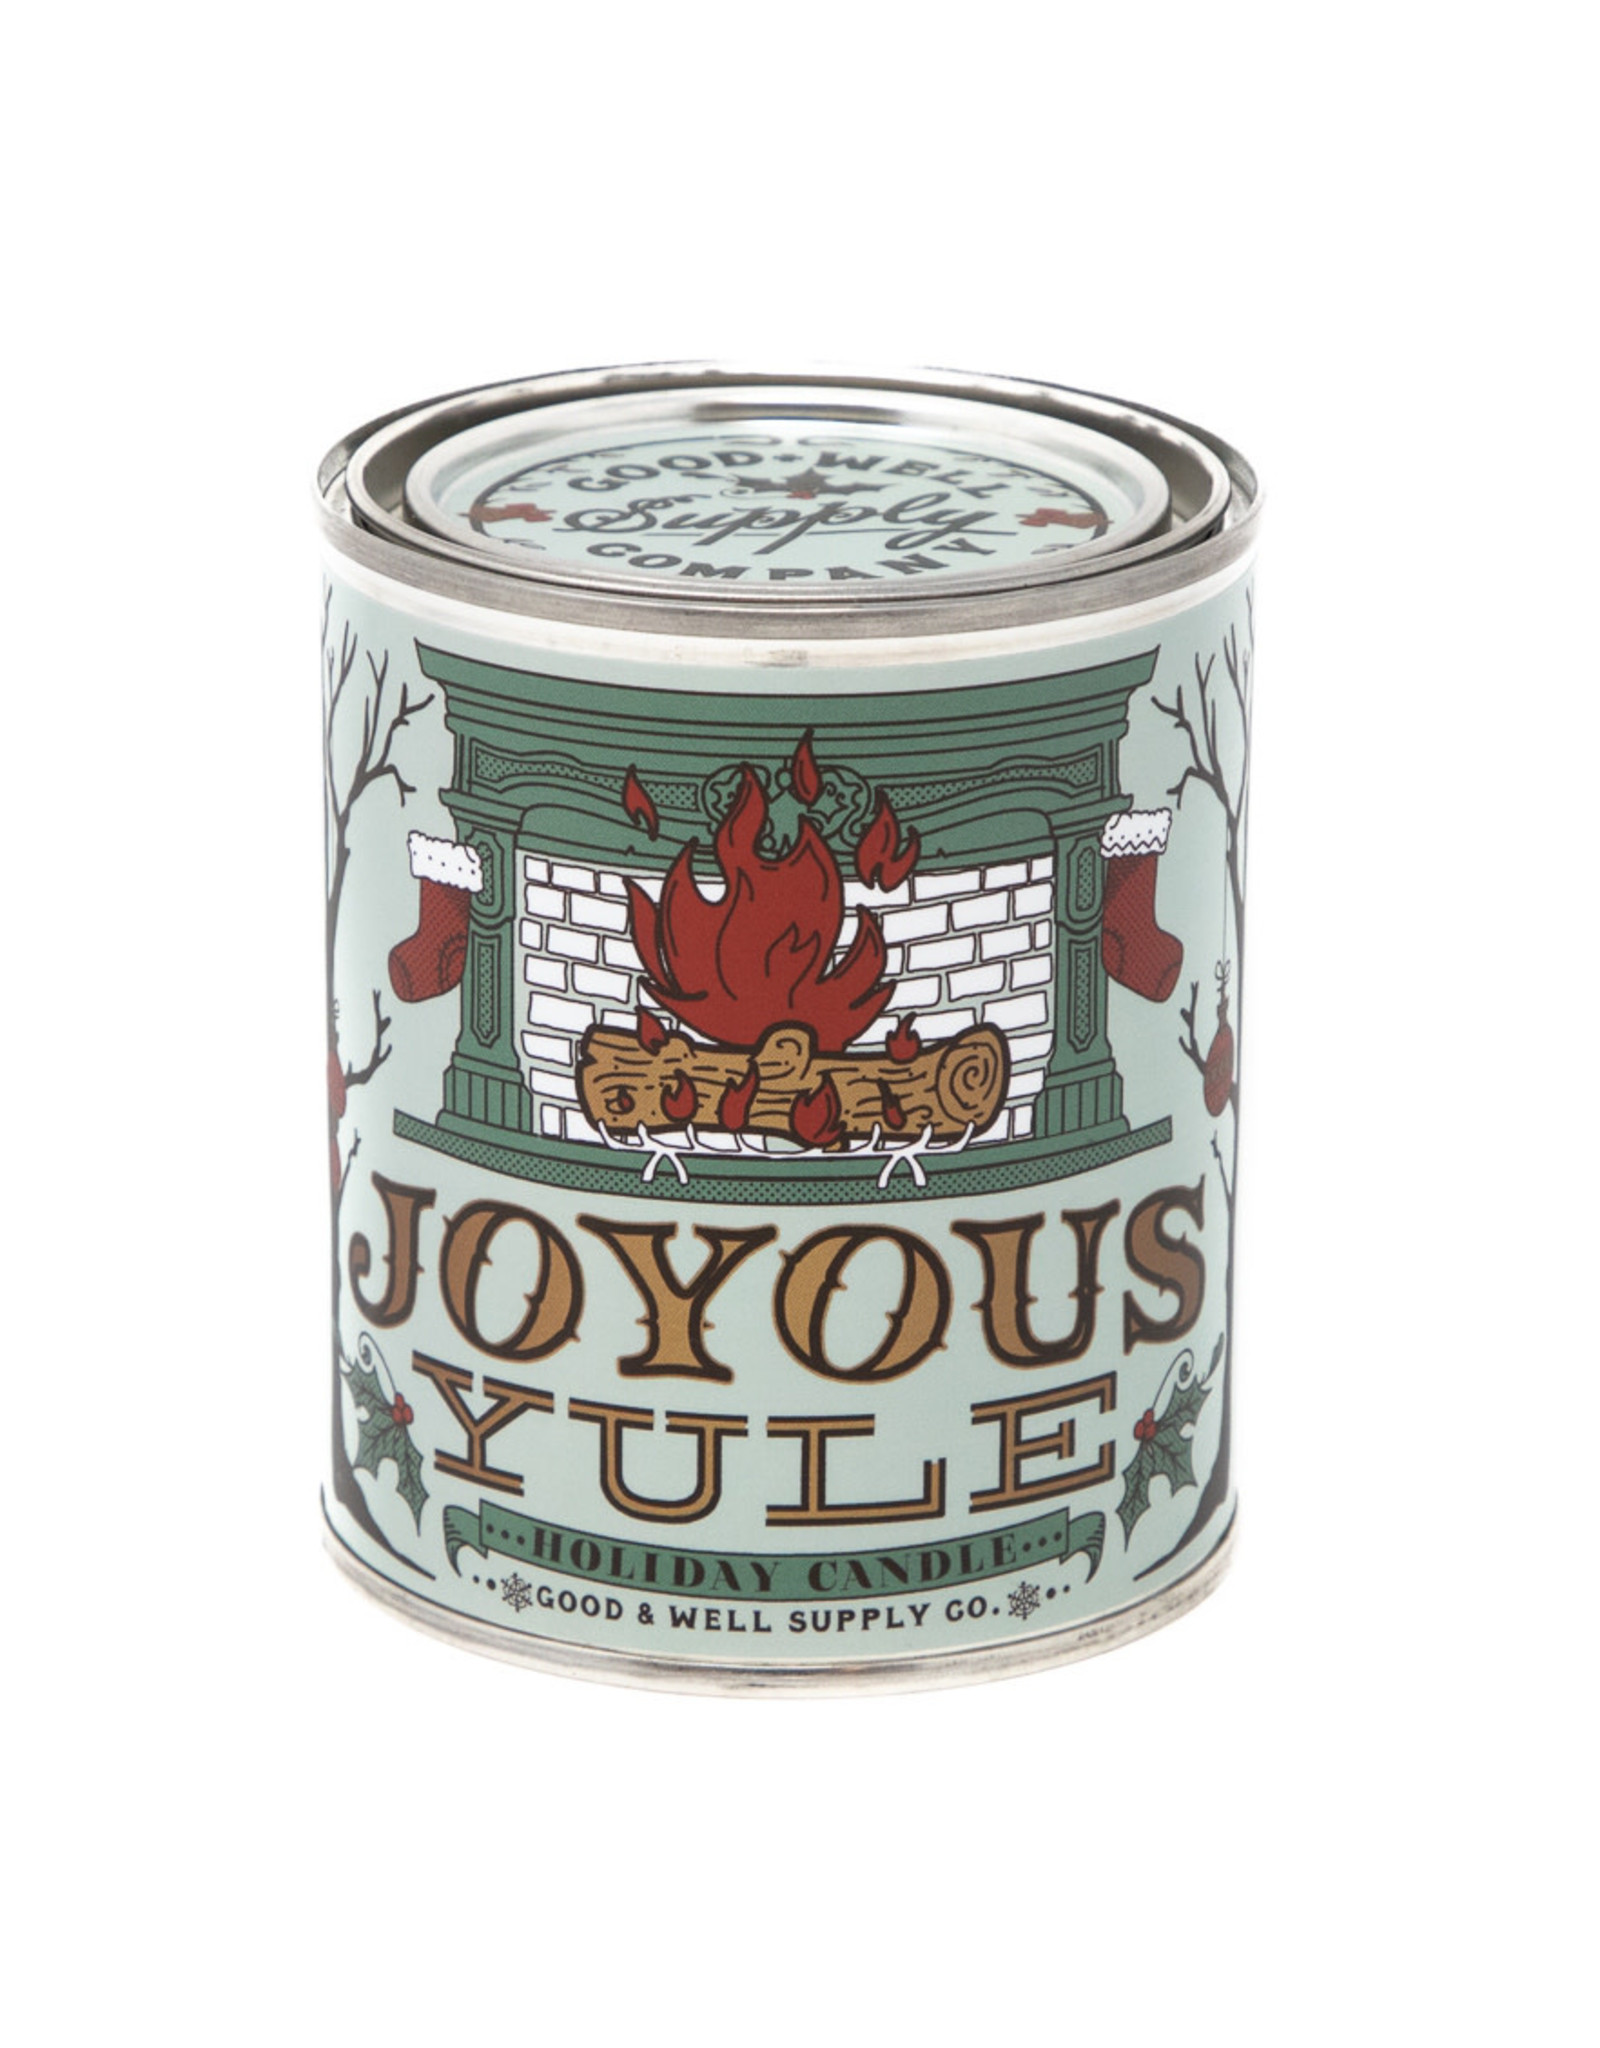 Good & Well Supply Co. Pint Joyous Yule Holiday Candle